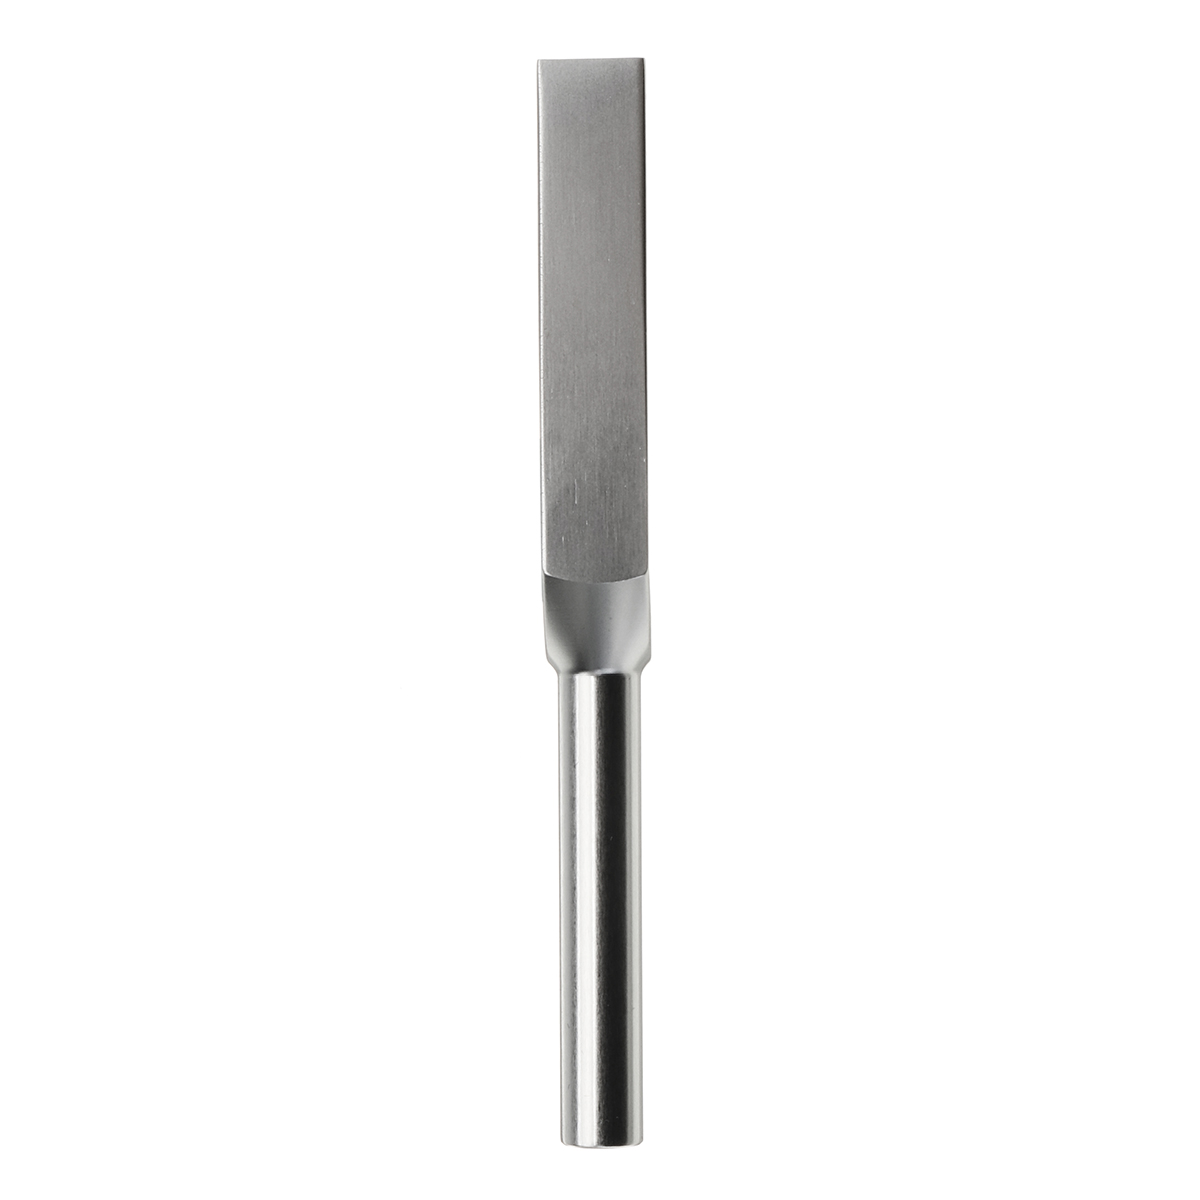 4096Hz-Aluminum-Musical-Tuning-Fork-Instrument-for-Healing-Sound-Vibration-Therapy-Tools-1282655-4